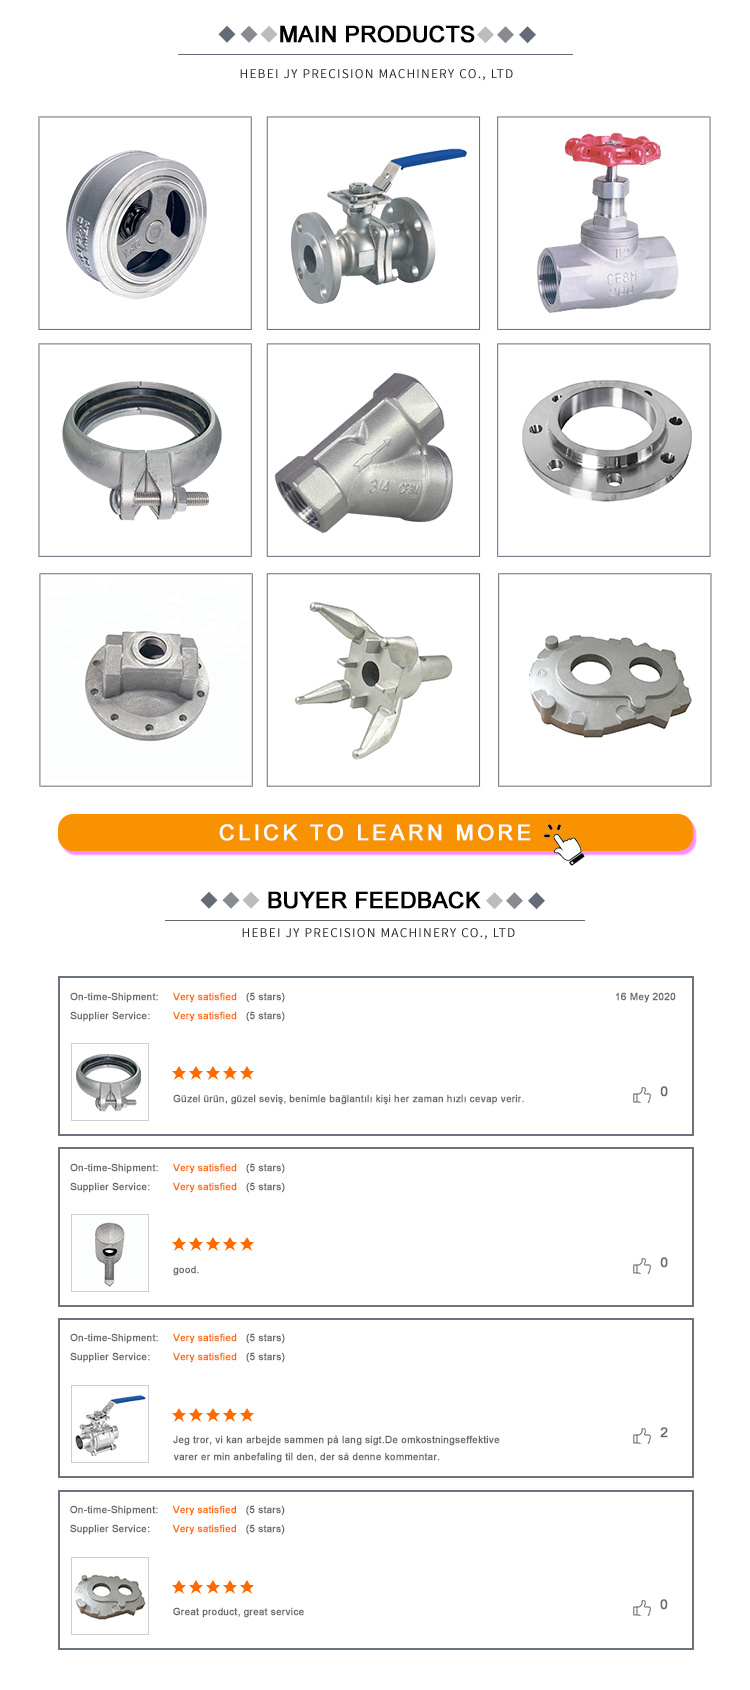 Junya OEM Elbow Lost Wax Casting Stainless Steel 304 316 Thread Connection Male and Female Sanitary Elbow Pipe Fitting Plumbing Accessories